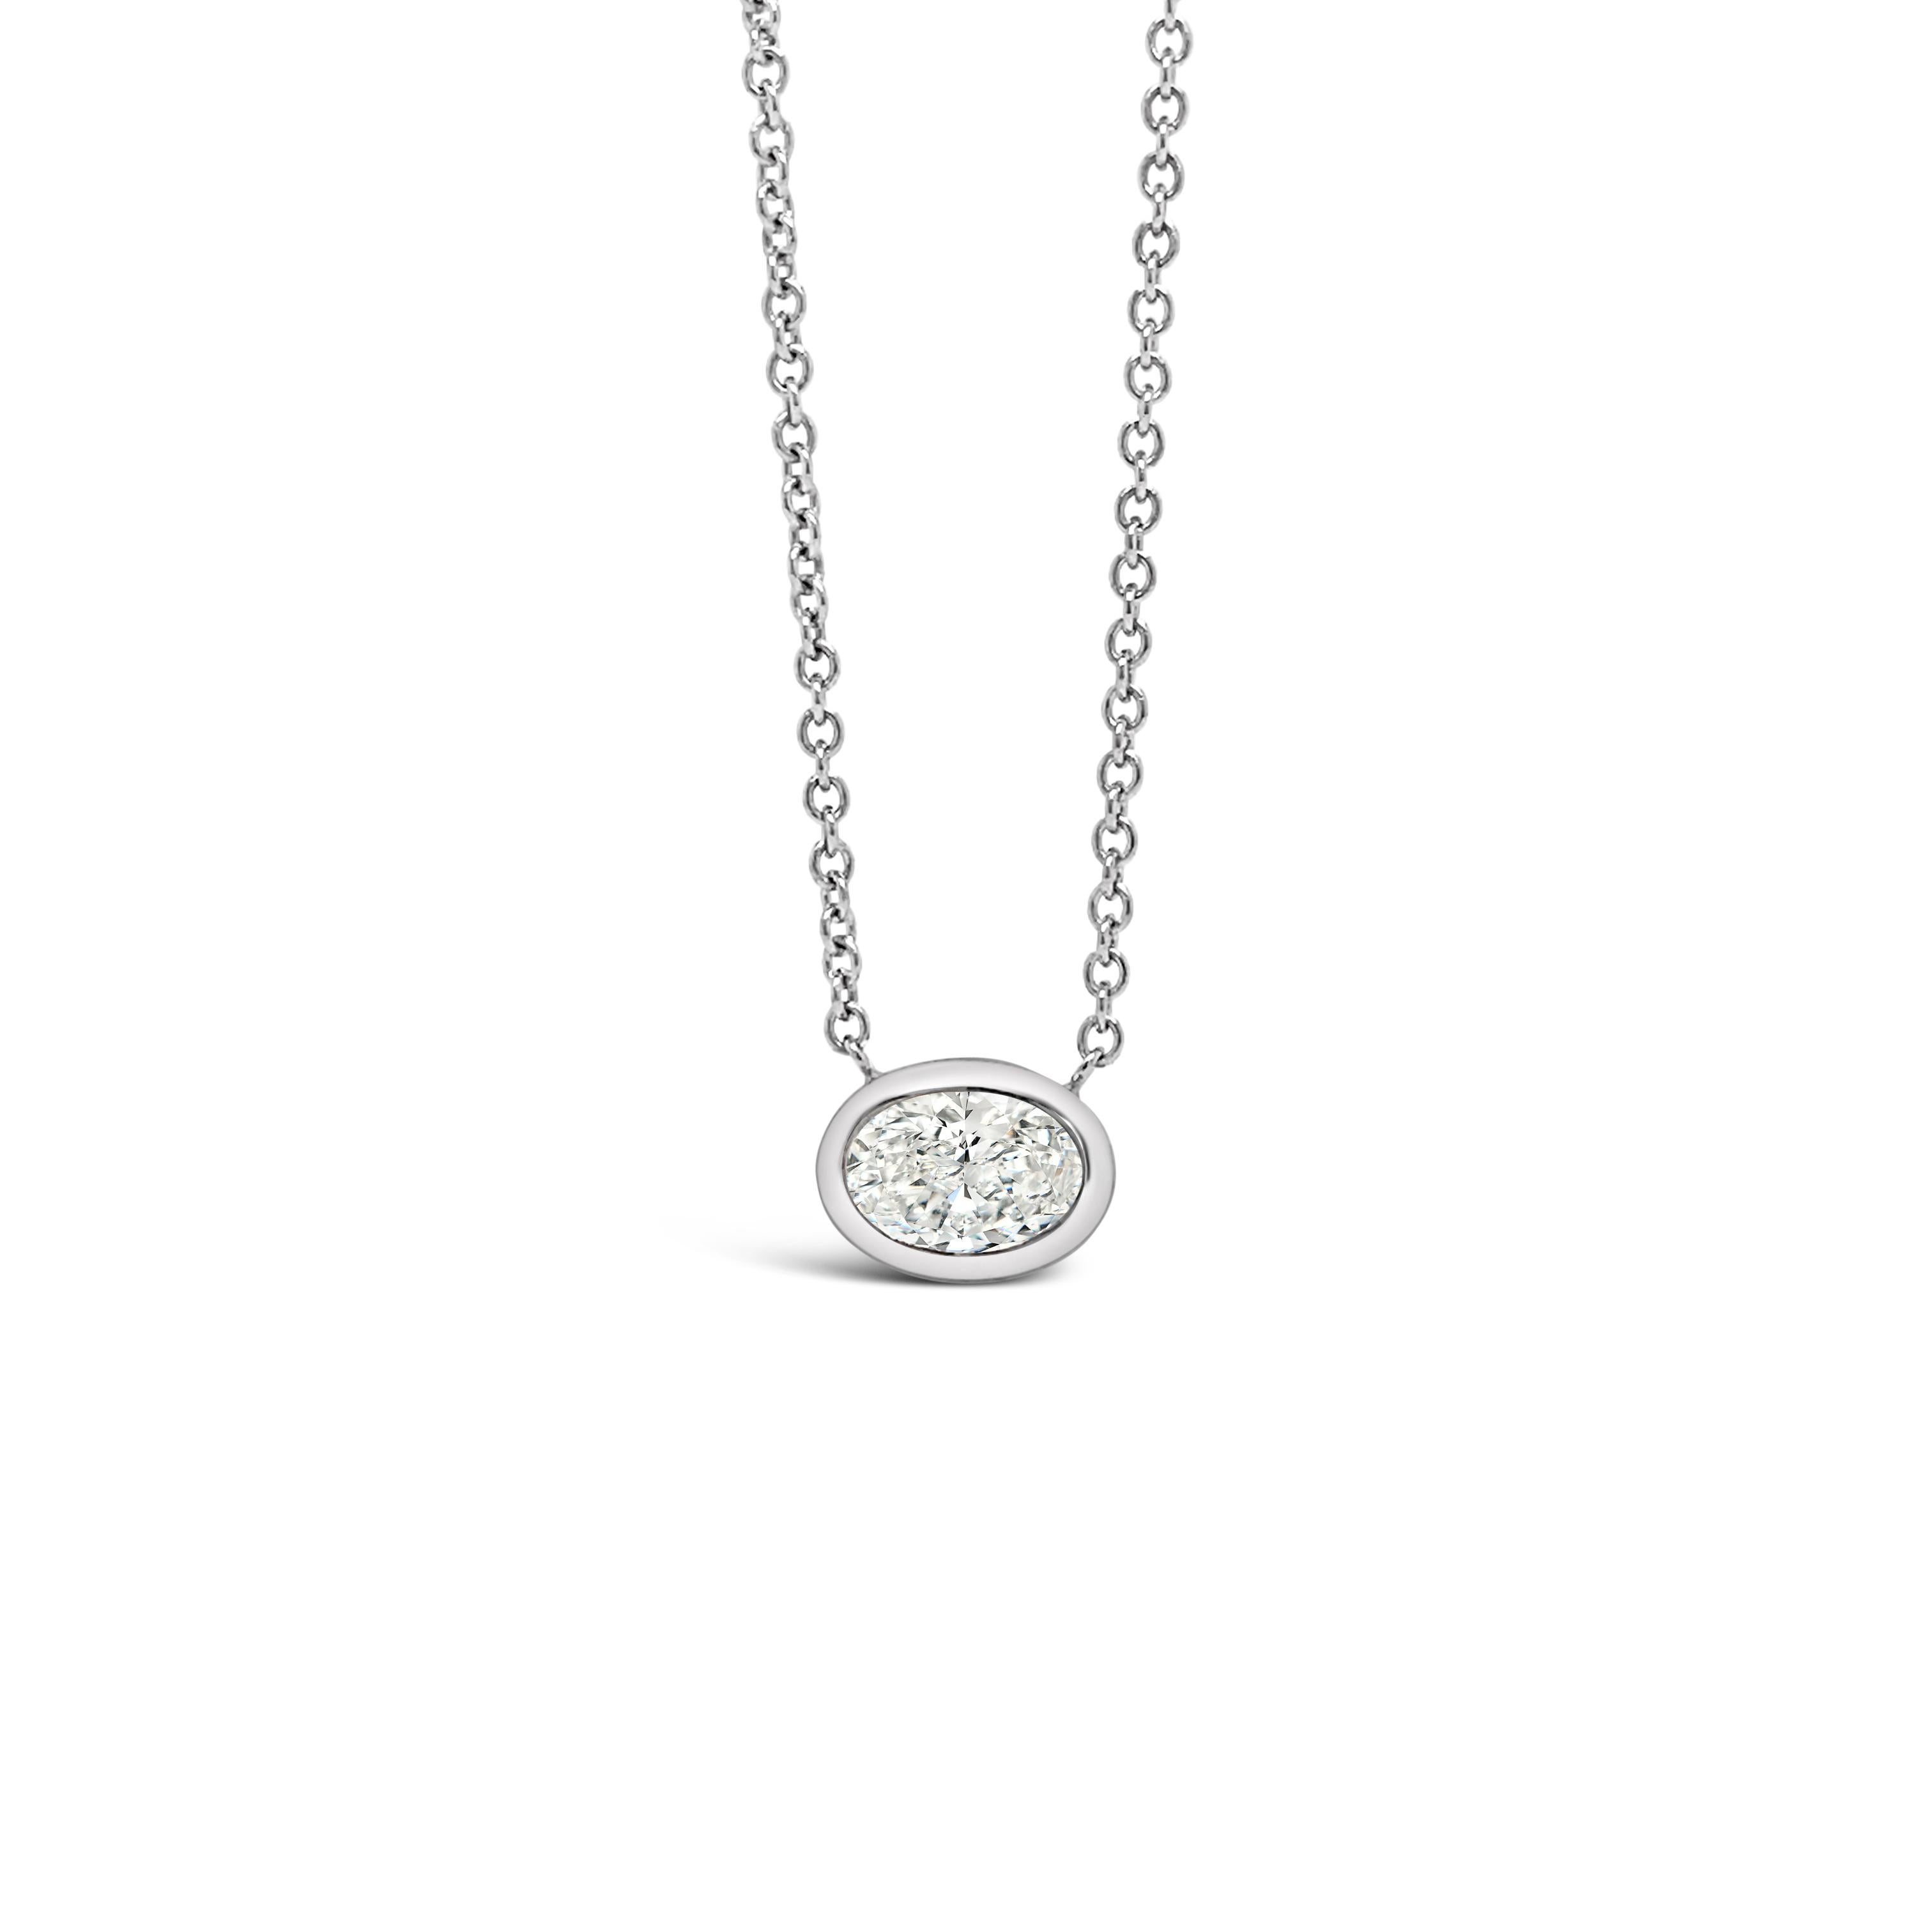 This pendant features and 40 Pointer Oval diamond set horizontally.
The diamond is E Color, SI2 Clarity. The Pendant is set in 18K White Gold.
The Oval diamond is GIA certified